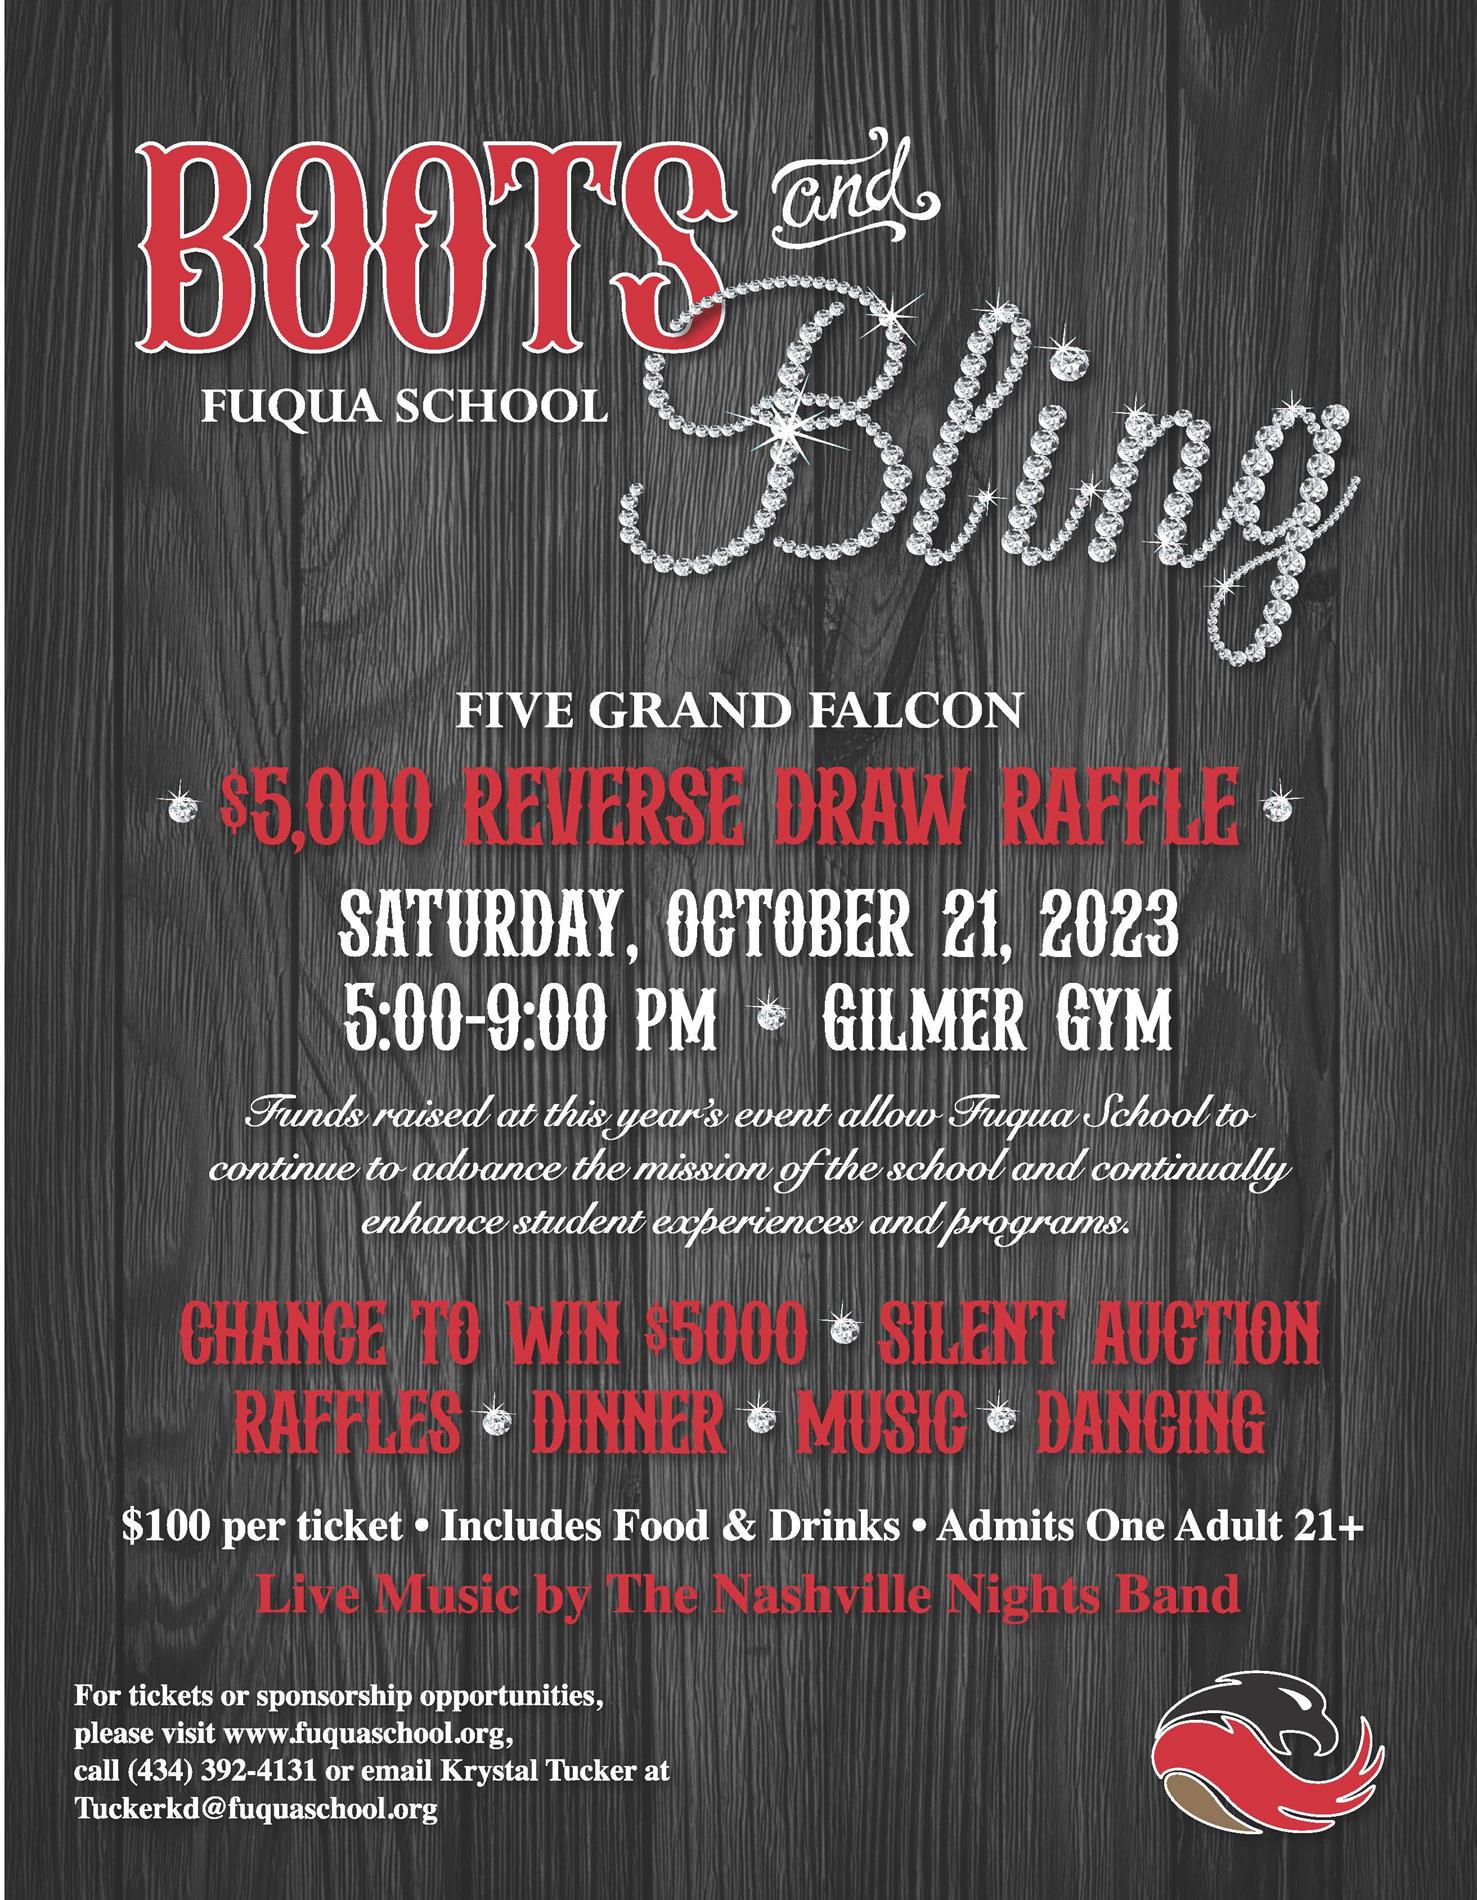 Boots & Bling - 5 Grand Falcon